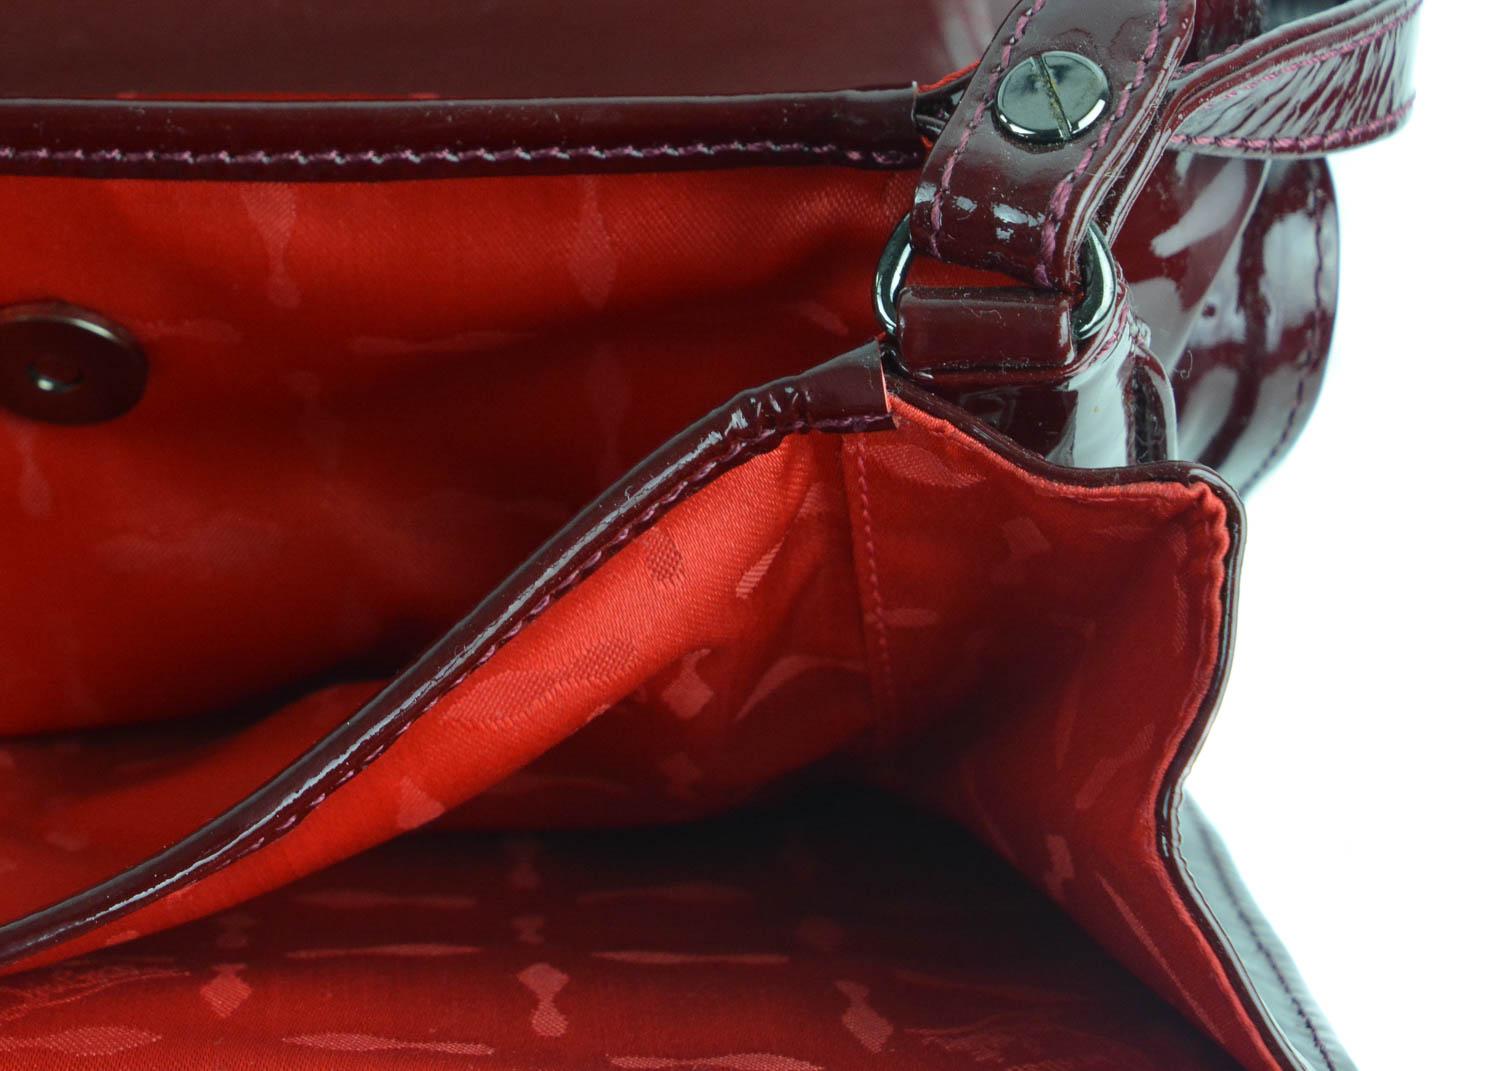 Christian Louboutin burgundy patent leather shoulder bag. This bag features an allover solid color on a patent leather textile. The bag is a great everyday bag to wear throughout all seasons with its color. Pair with denim and a blouse for a laid